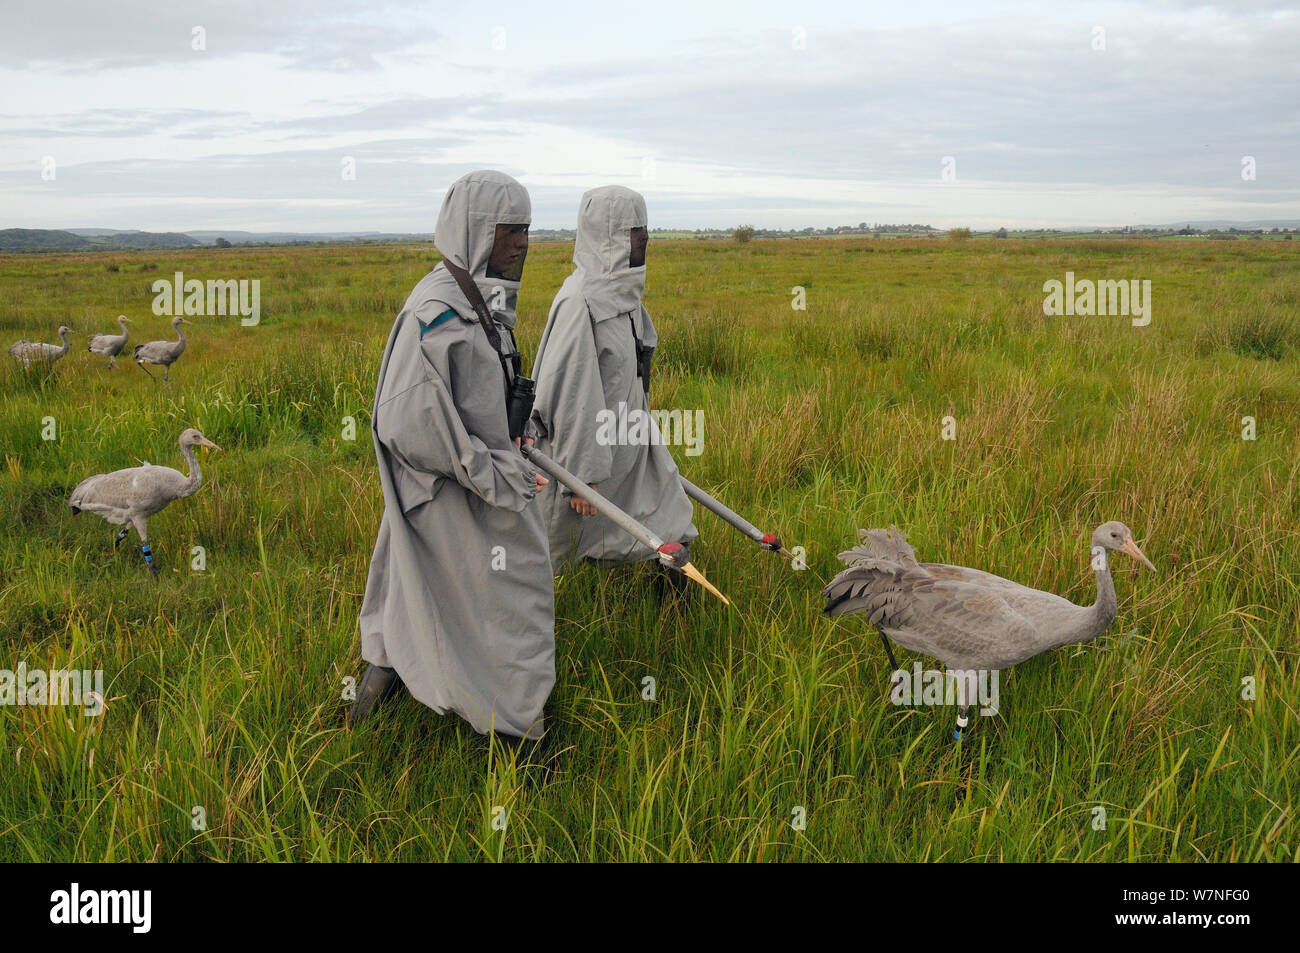 Group of recently released young Common / Eurasian cranes (Grus grus) walking with two carers in crane costumes acting as surrogate parents, Somerset Levels, England, UK, September 2012 Stock Photo